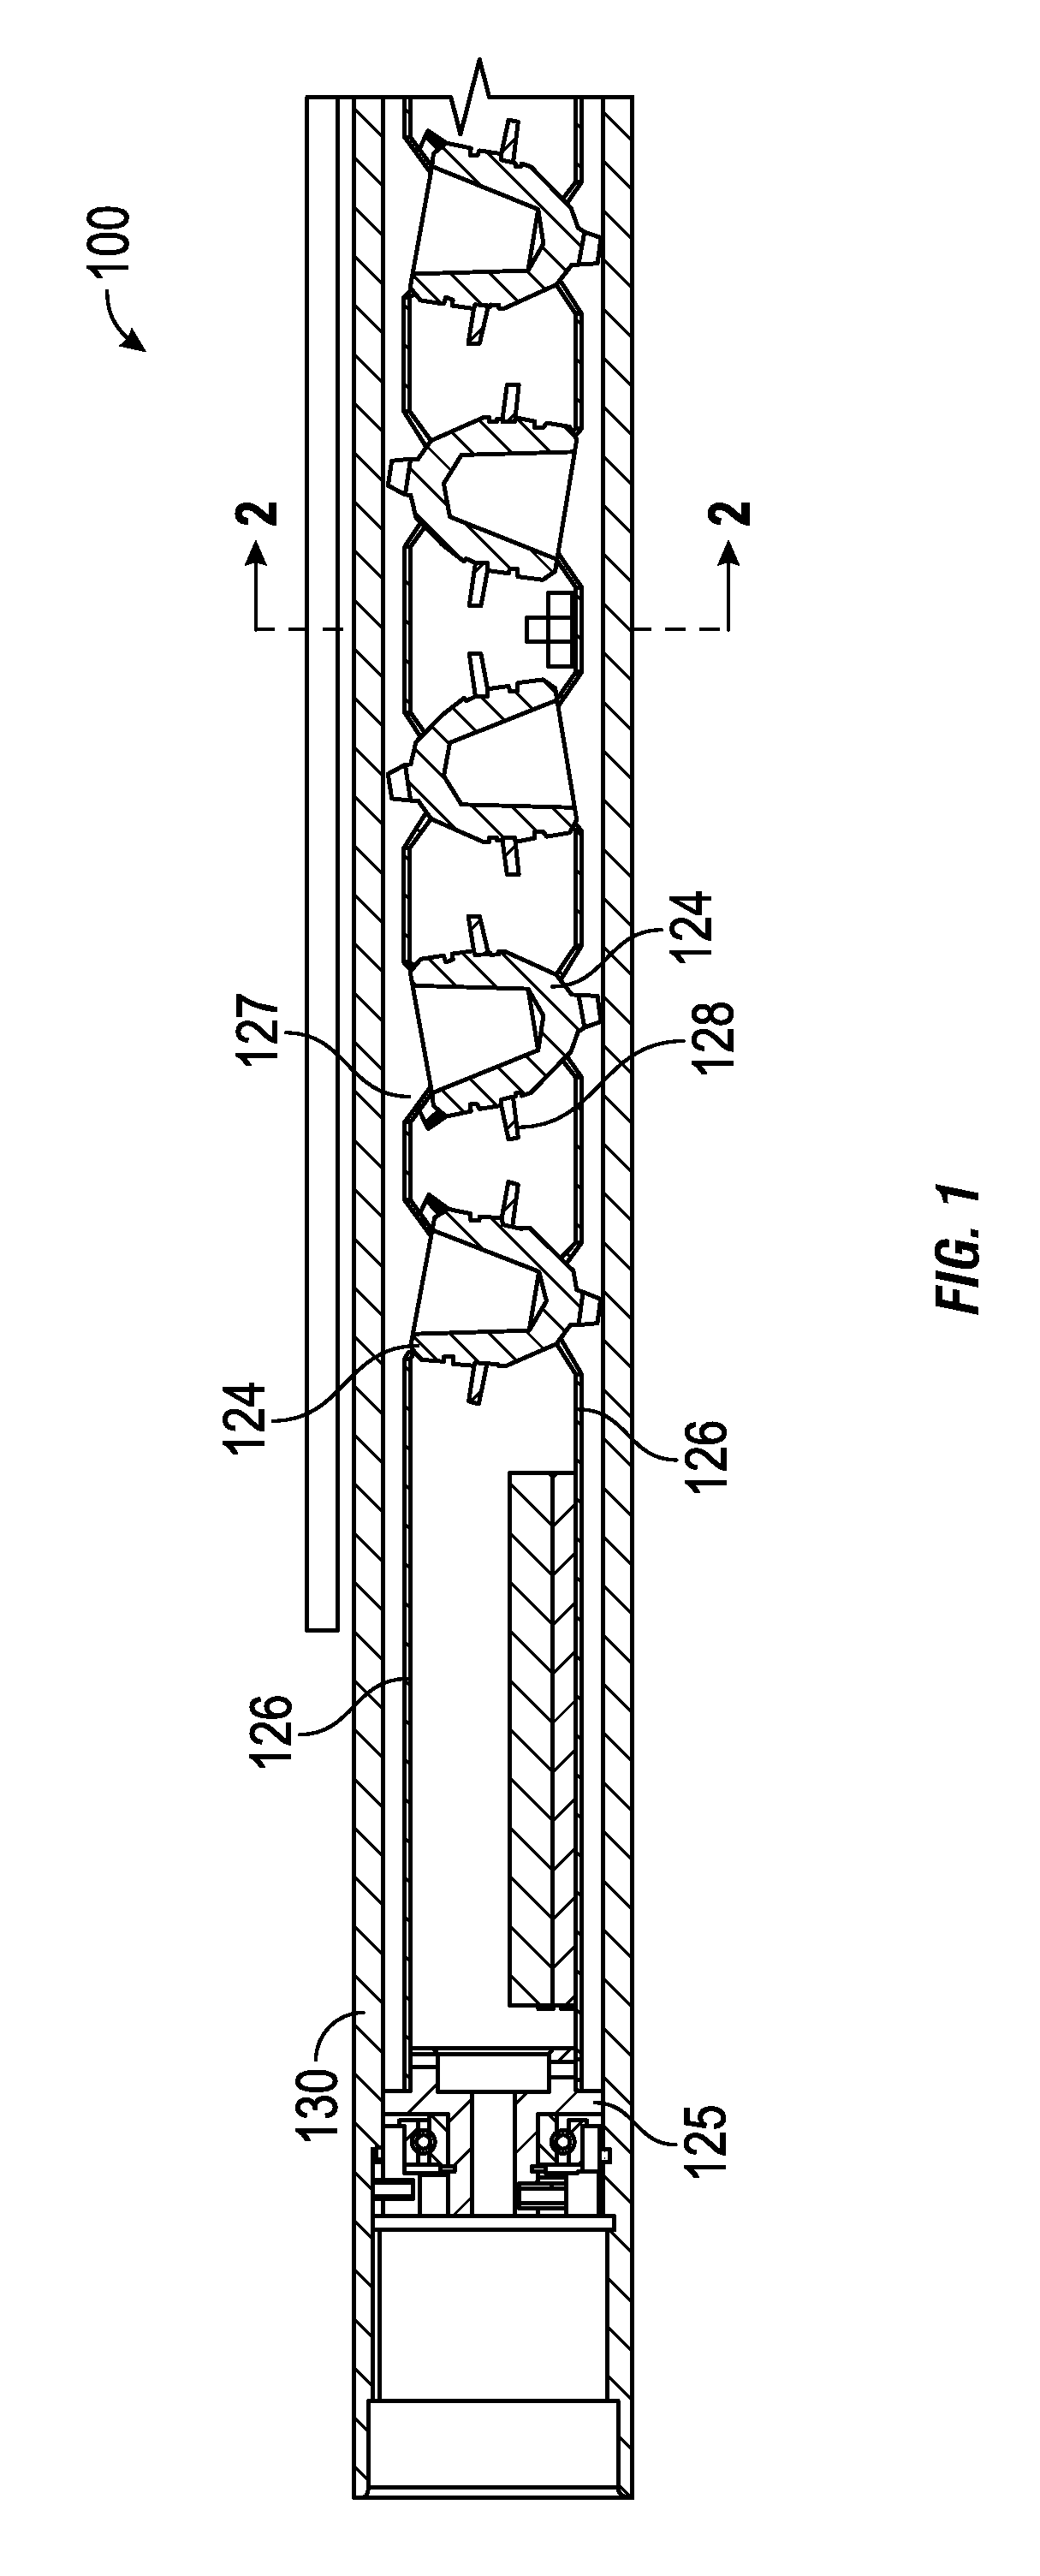 Limited Entry Phased Preforating Gun System and Method